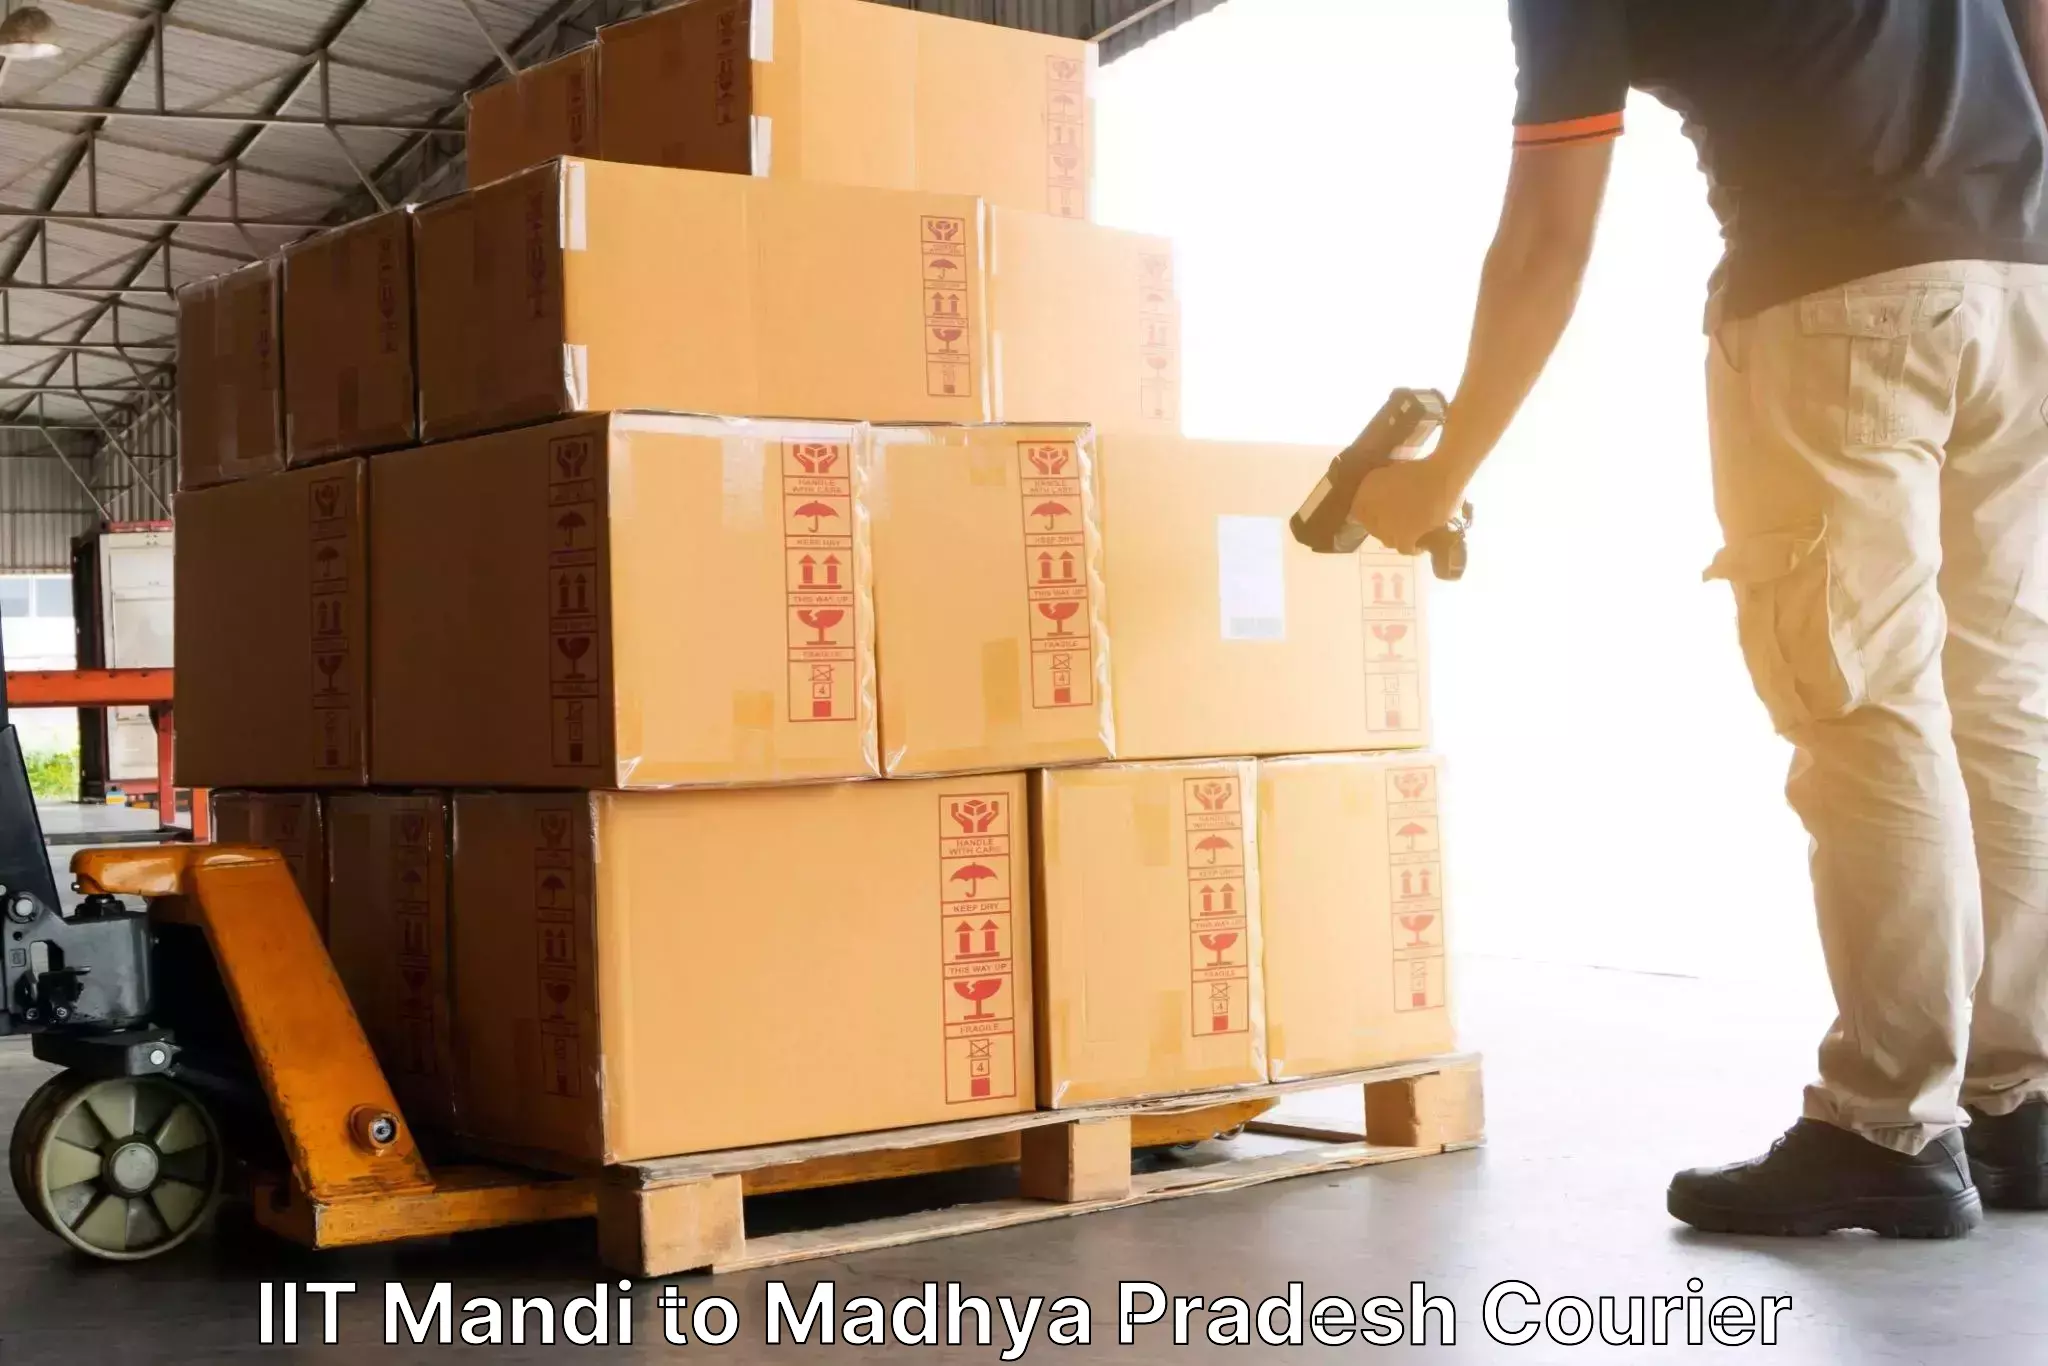 Courier dispatch services IIT Mandi to Alote